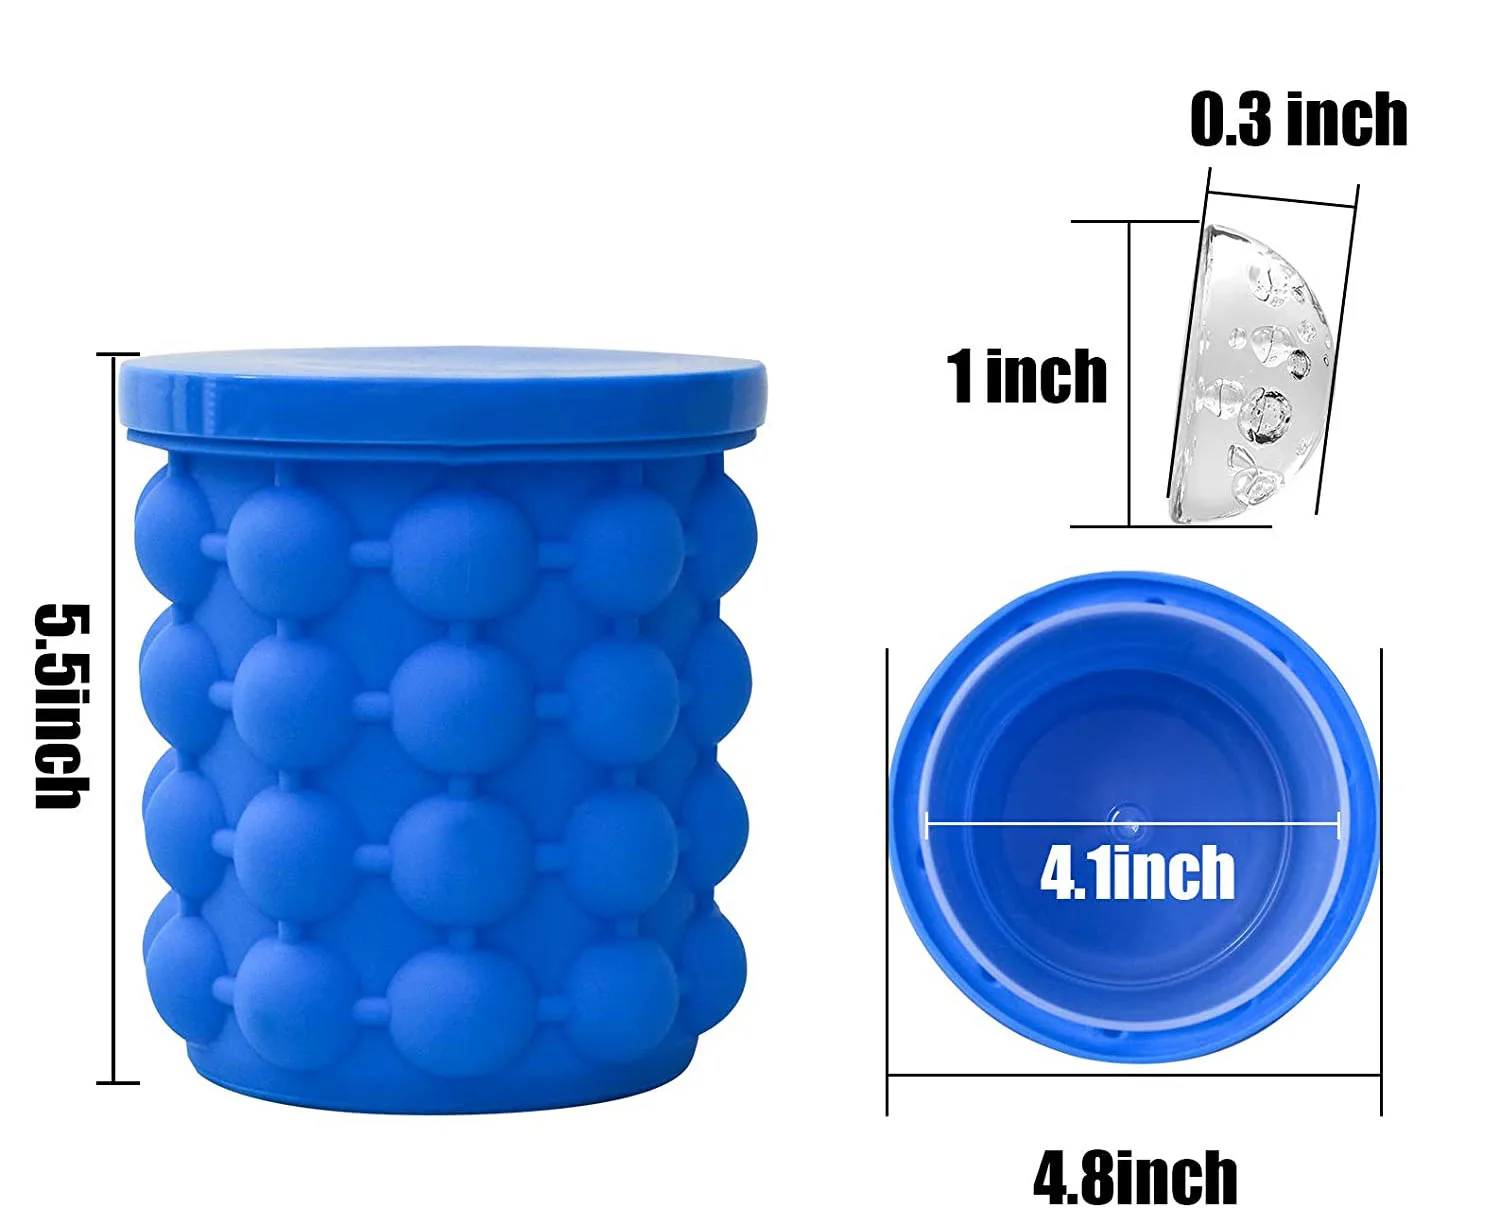 Ice Cube Tray, Ice Cube Molds With Lid12.8*13.8cm, Premium Silicon